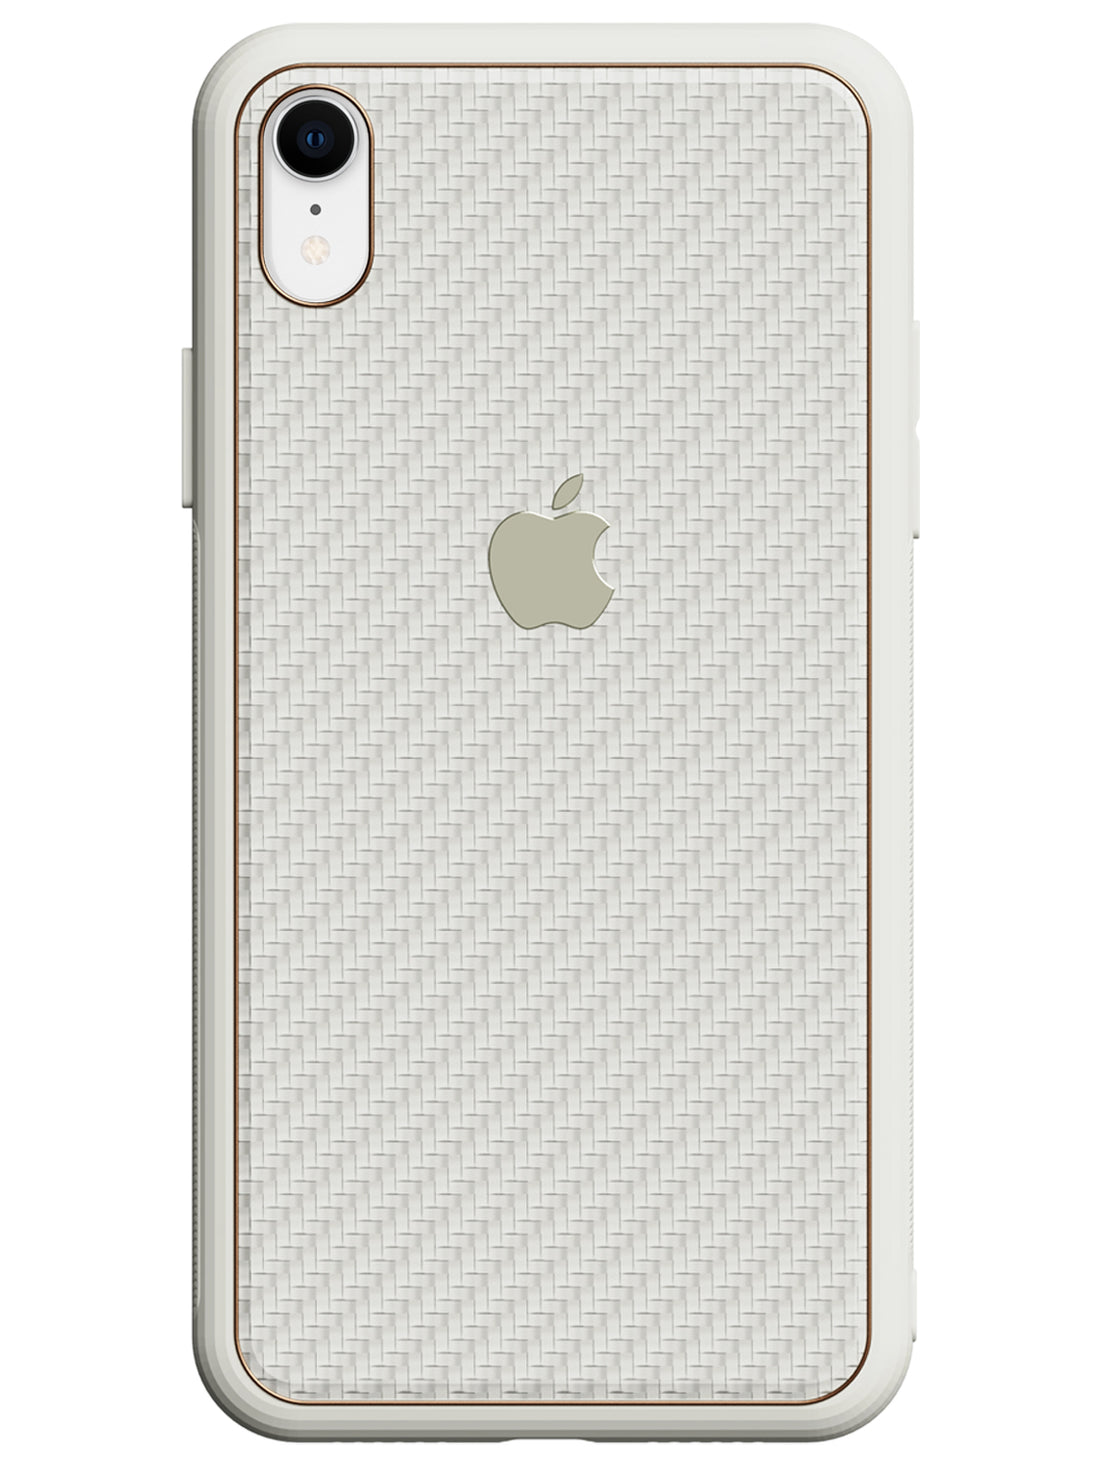 Carbon Leather Chrome Case - iPhone XR (White)